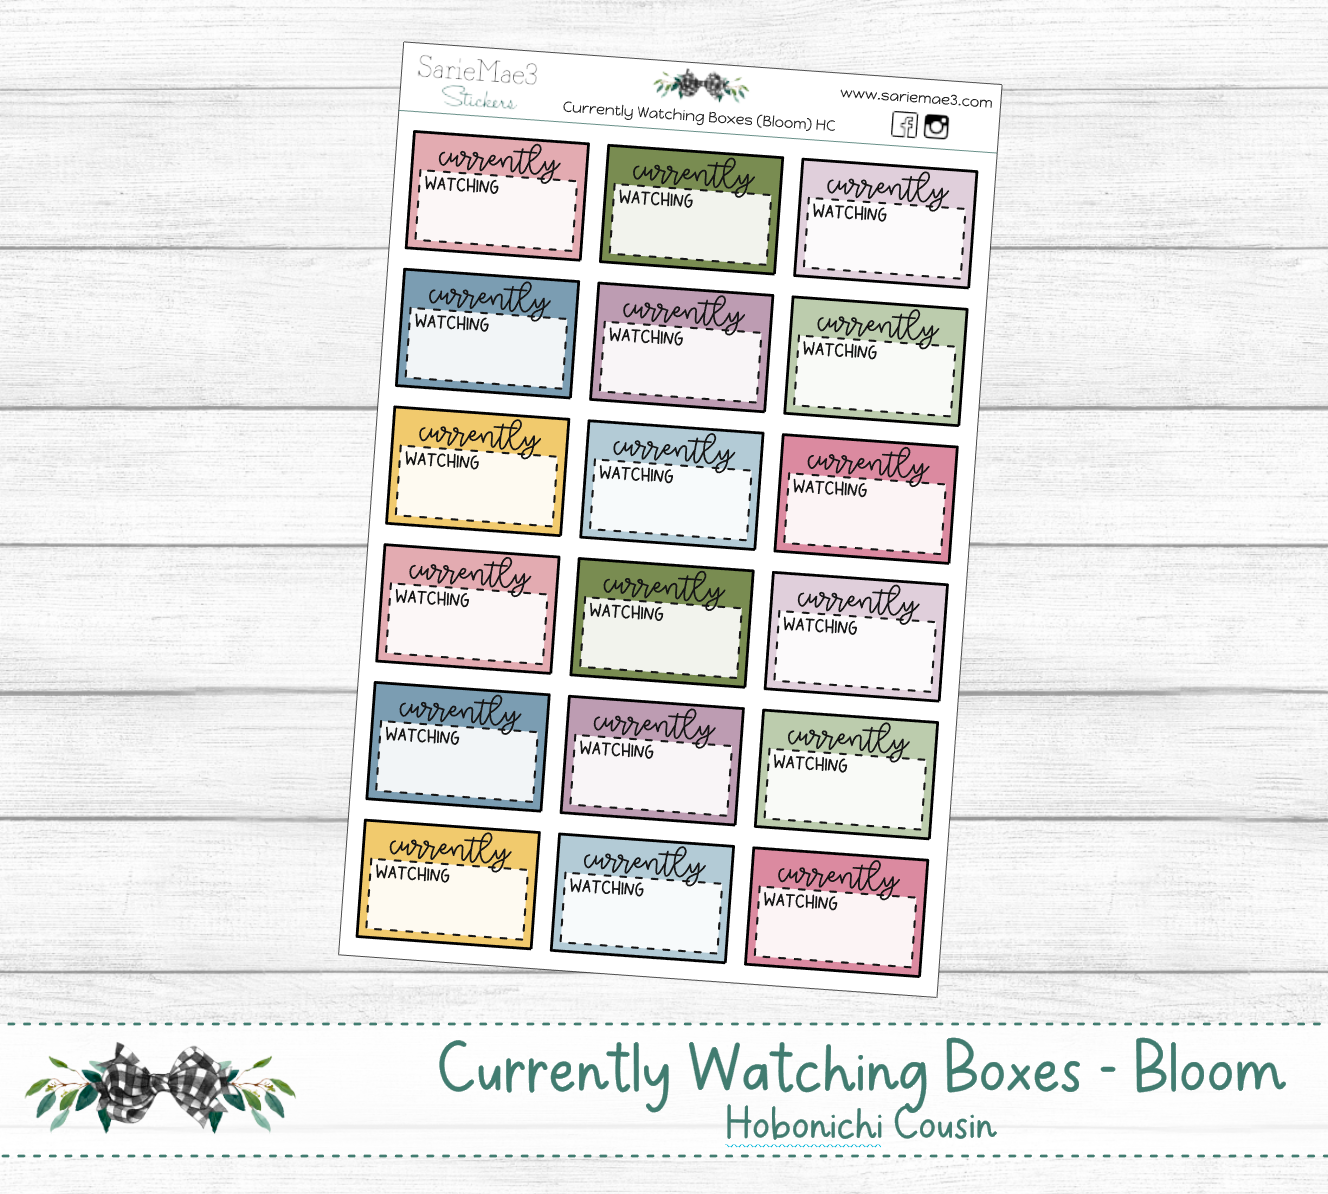 Currently Watching Boxes (Bloom) Hobonichi Cousin